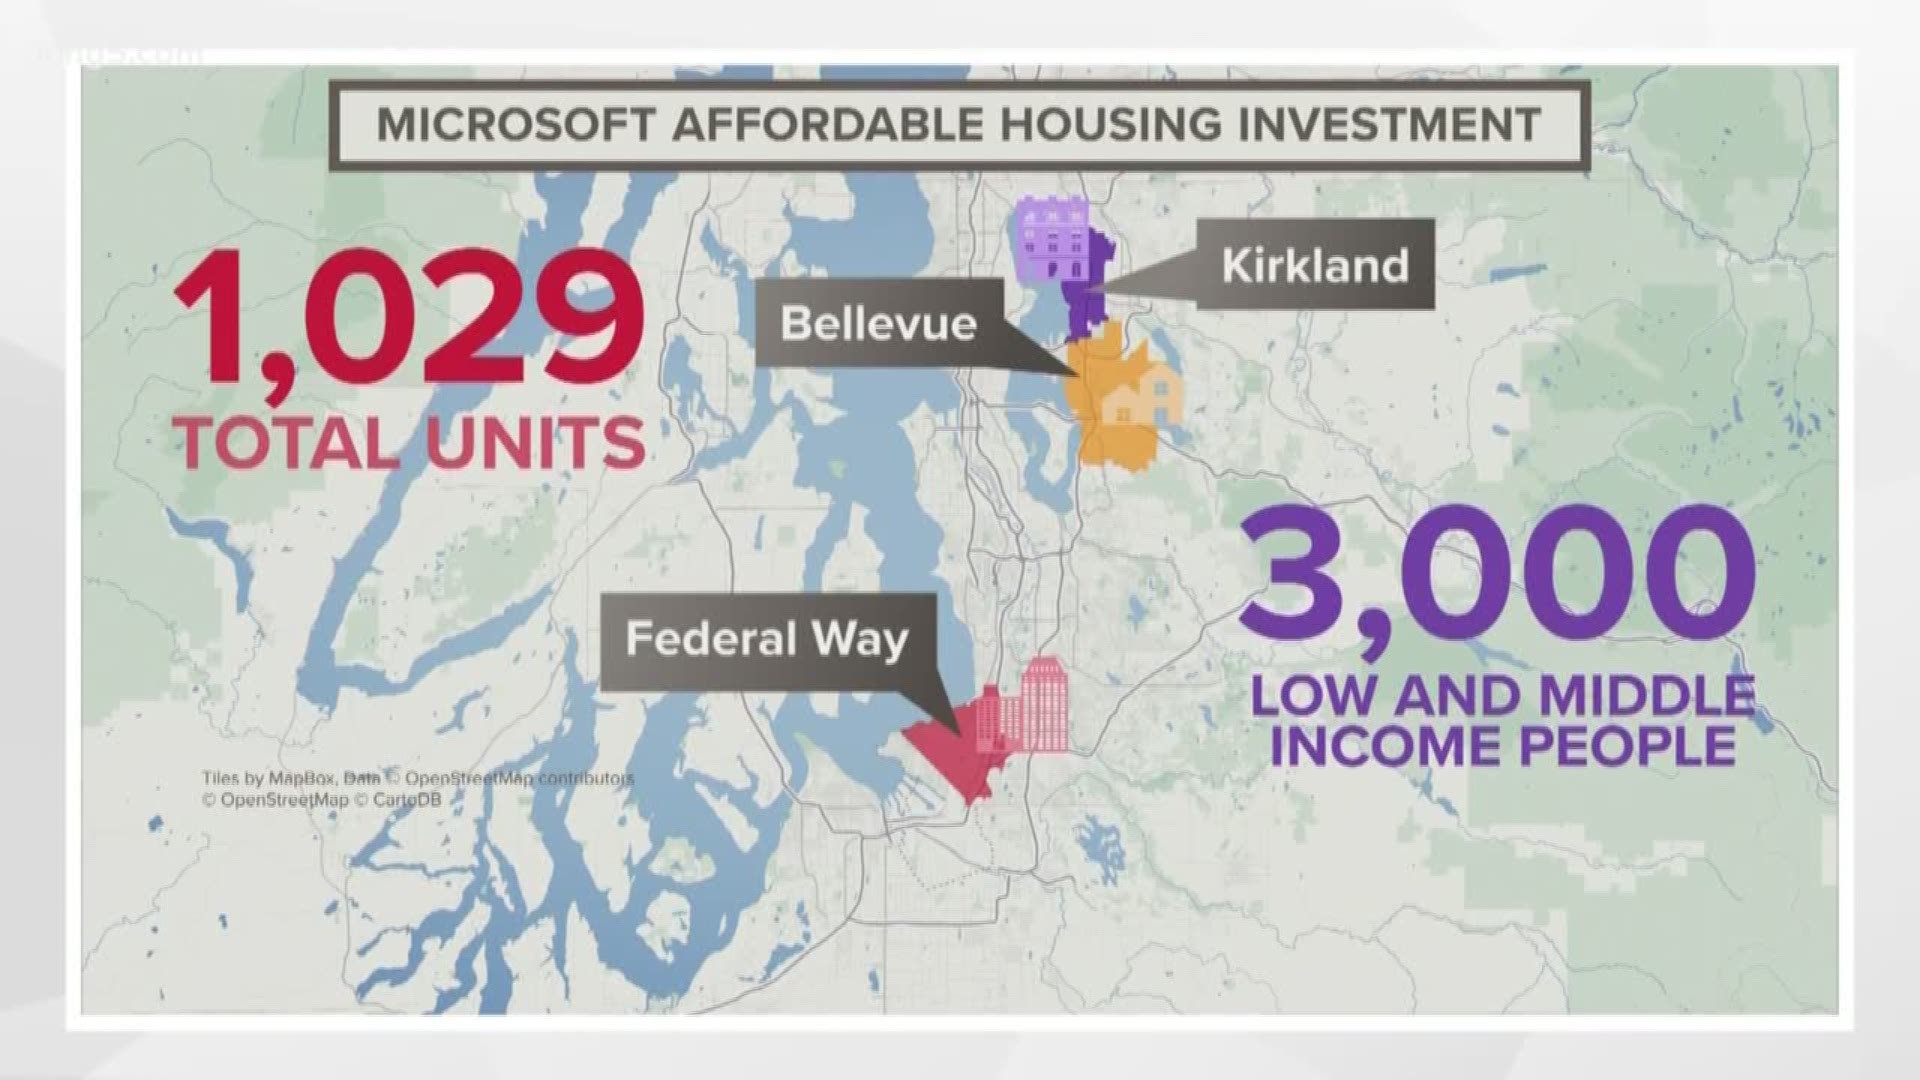 A $60 million loan will allow the King County Housing Authority to buy five apartment complexes in Kirkland, Bellevue, and Federal Way and stabilize rent long-term.